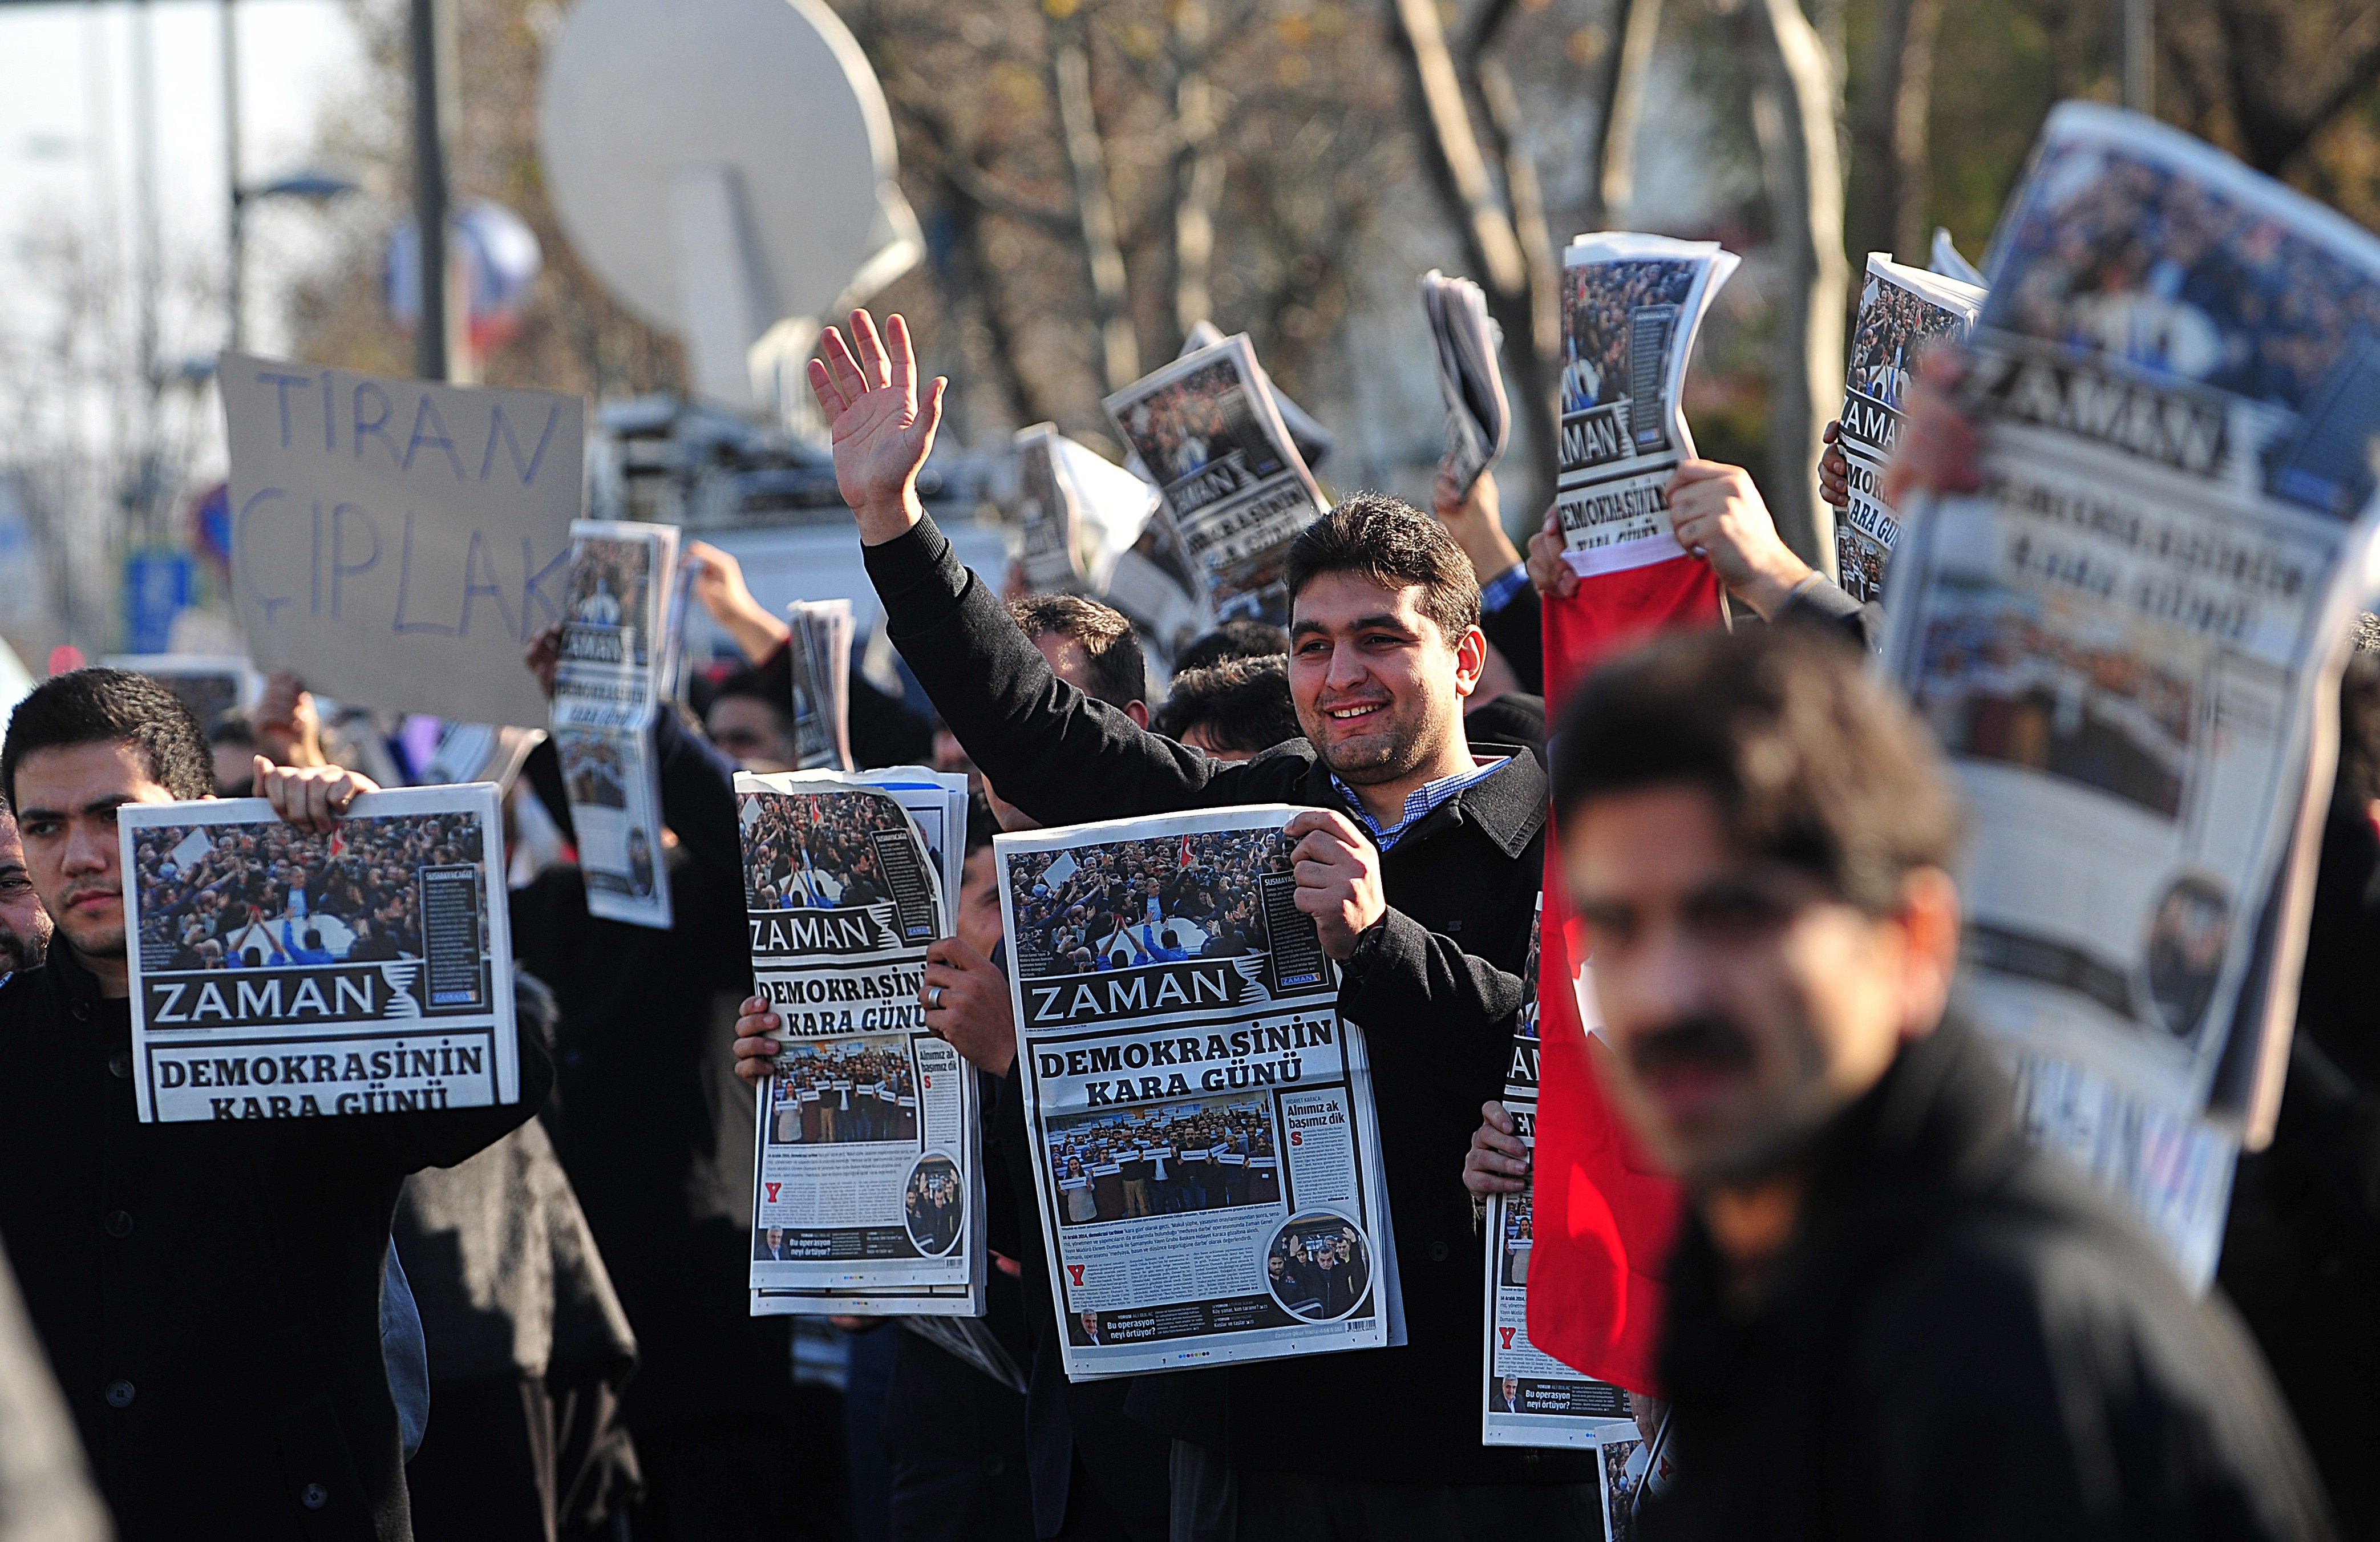 Over two dozen people were arrested in raids against media critical of Turkish president. (OZAN KOSE/AFP/Getty Images)